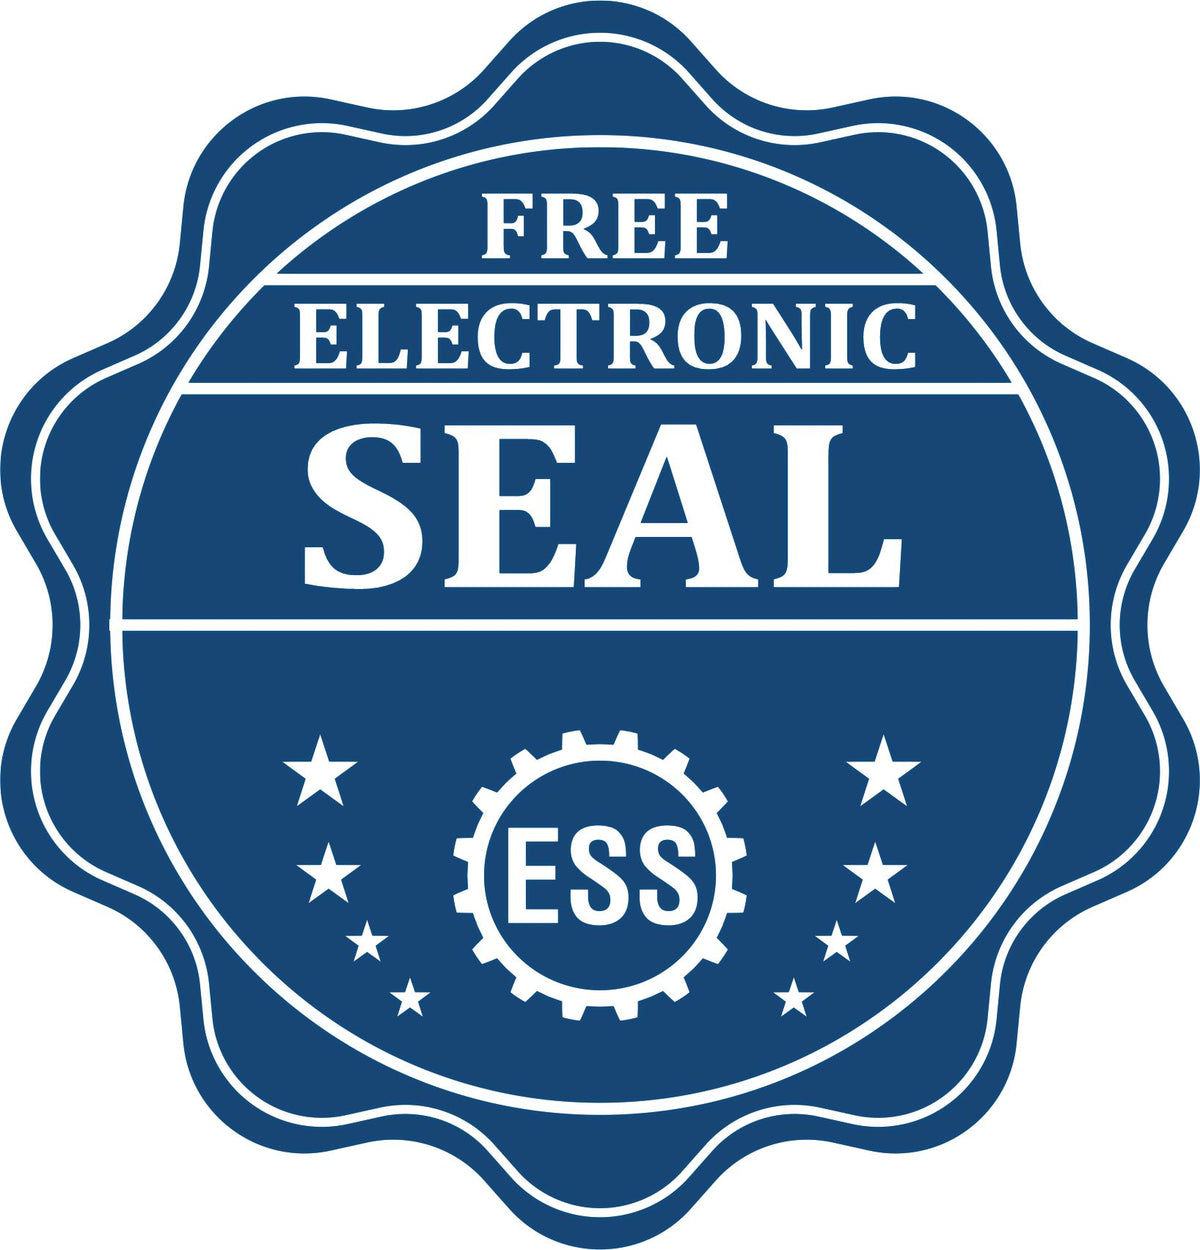 A badge showing a free electronic seal for the Heavy Duty Cast Iron New York Geologist Seal Embosser with stars and the ESS gear on the emblem.